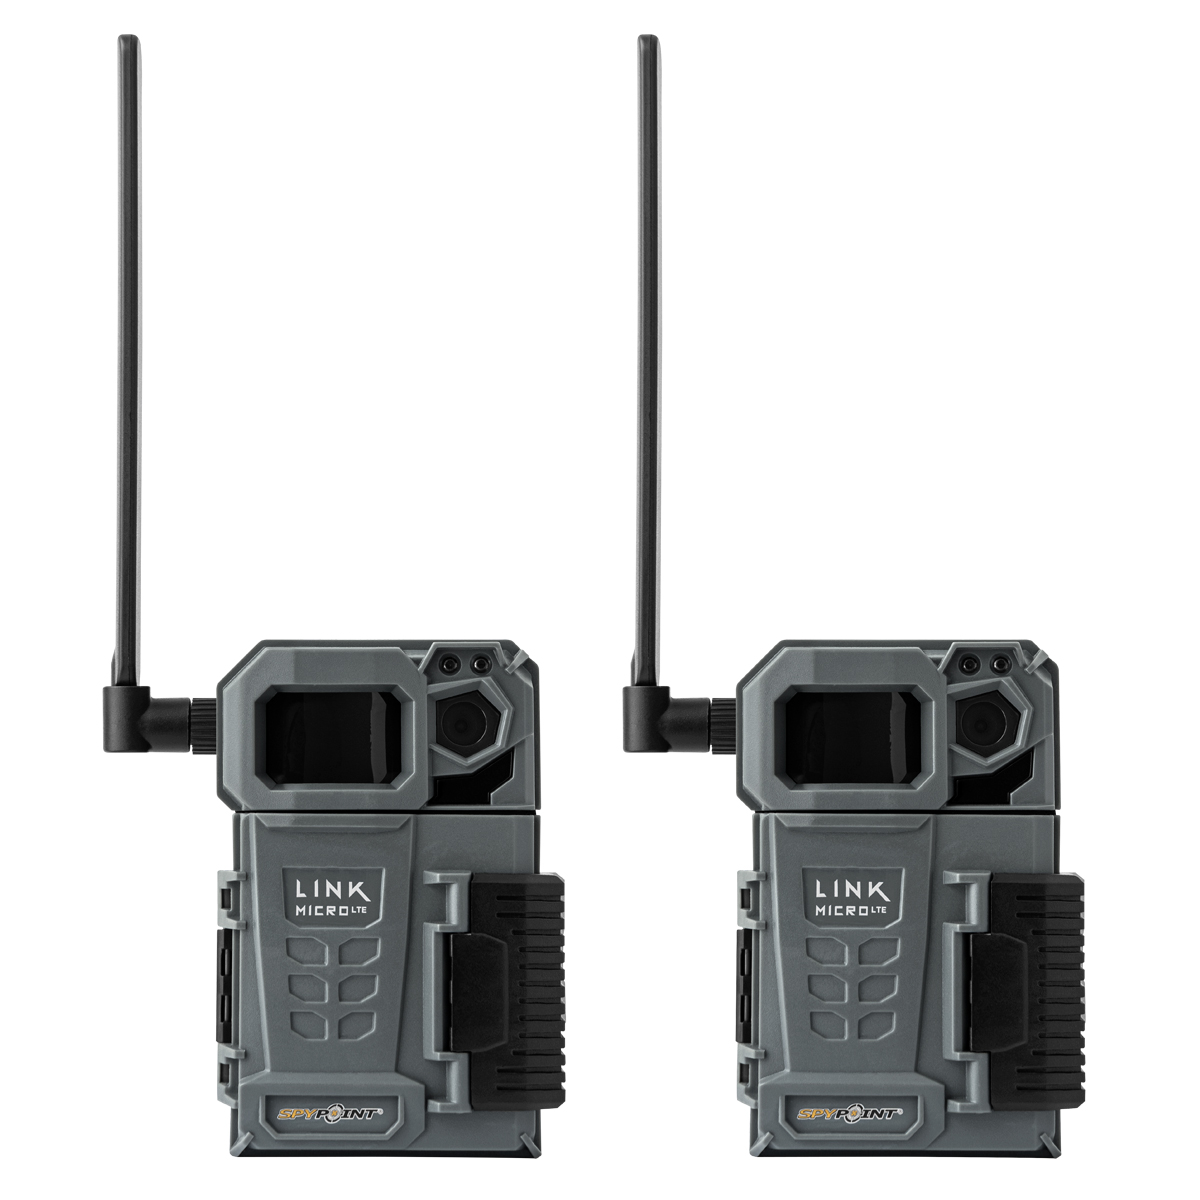 SPYPOINT LINK MICRO LTE 10MP WIRELESS TRAIL CAMERA - TWIN PACK Photo